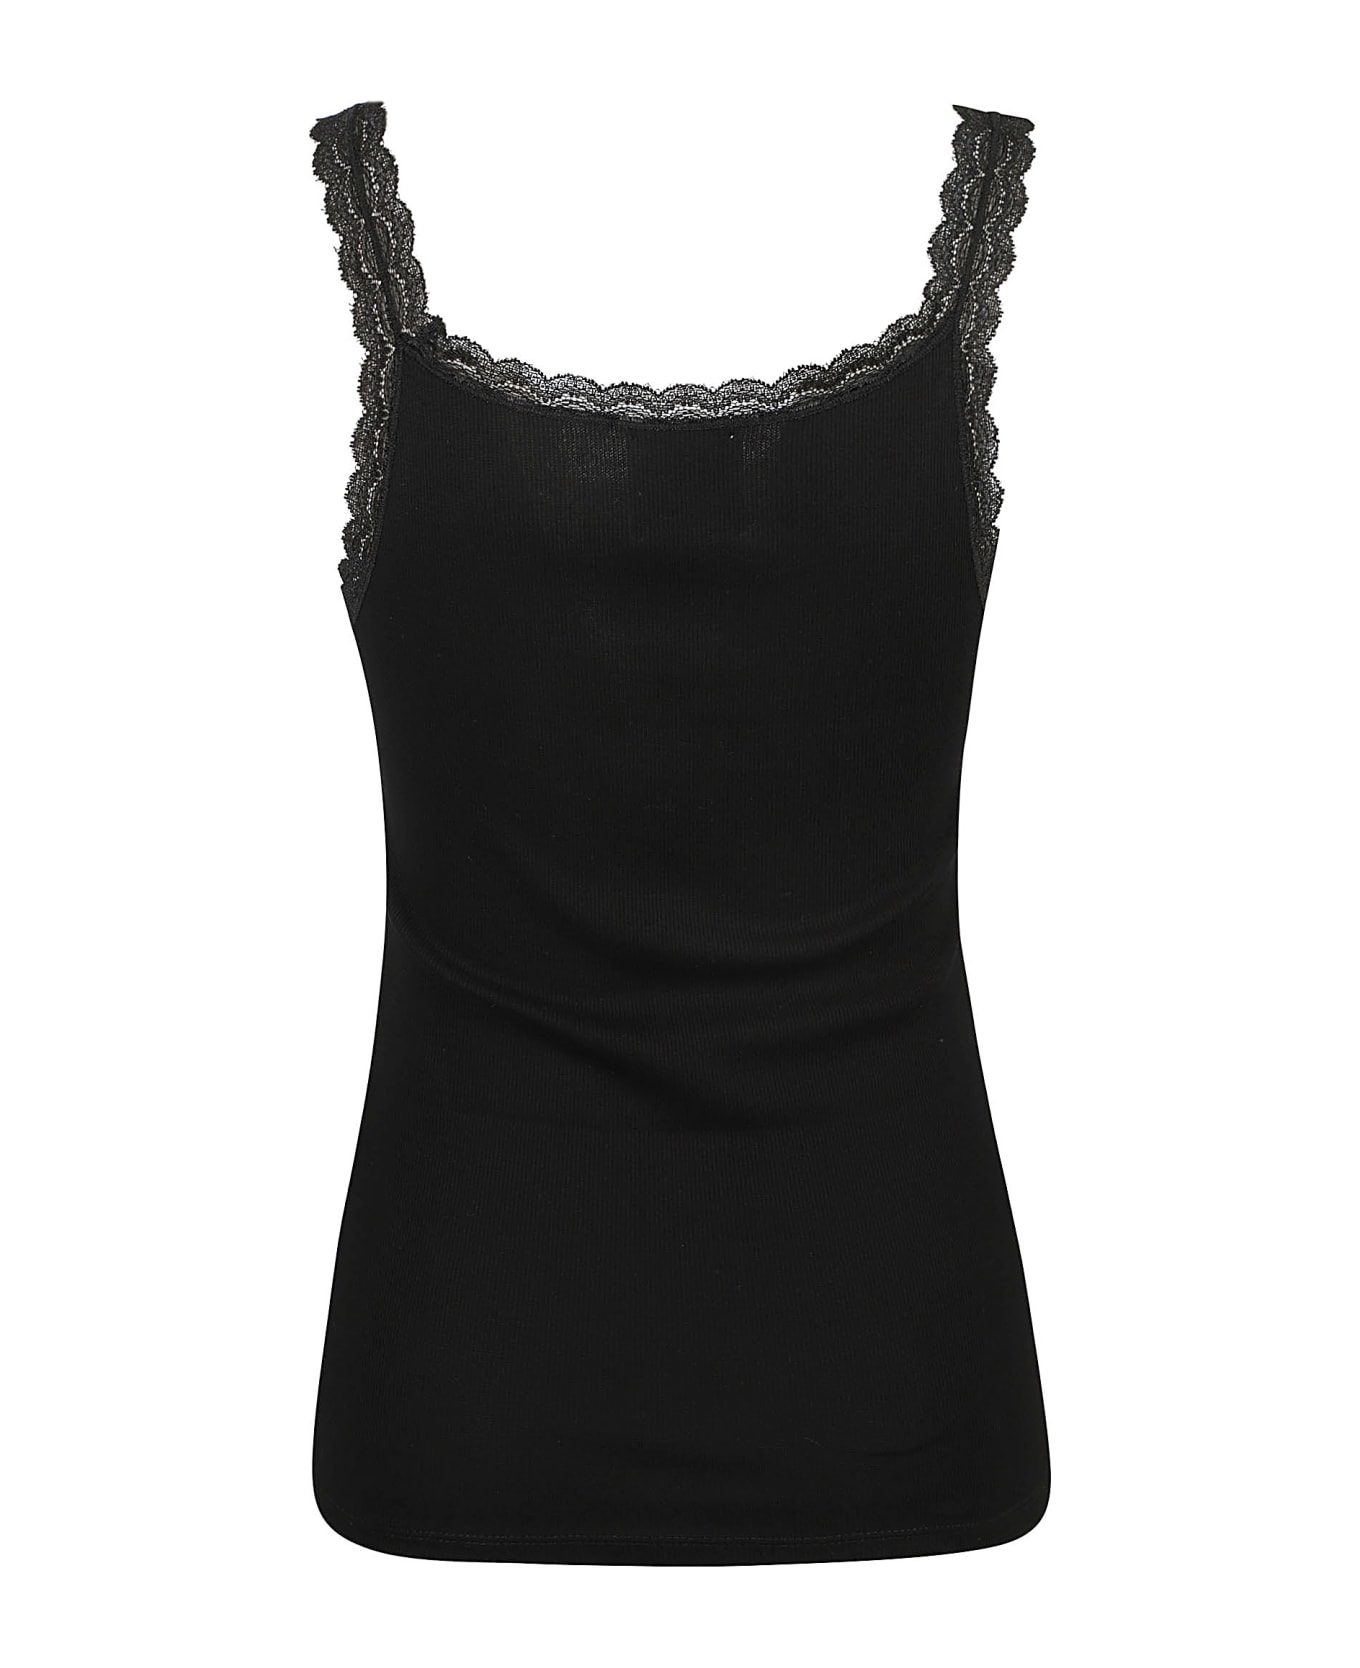 Allude Floral Laced Tank Top - Black タンクトップ